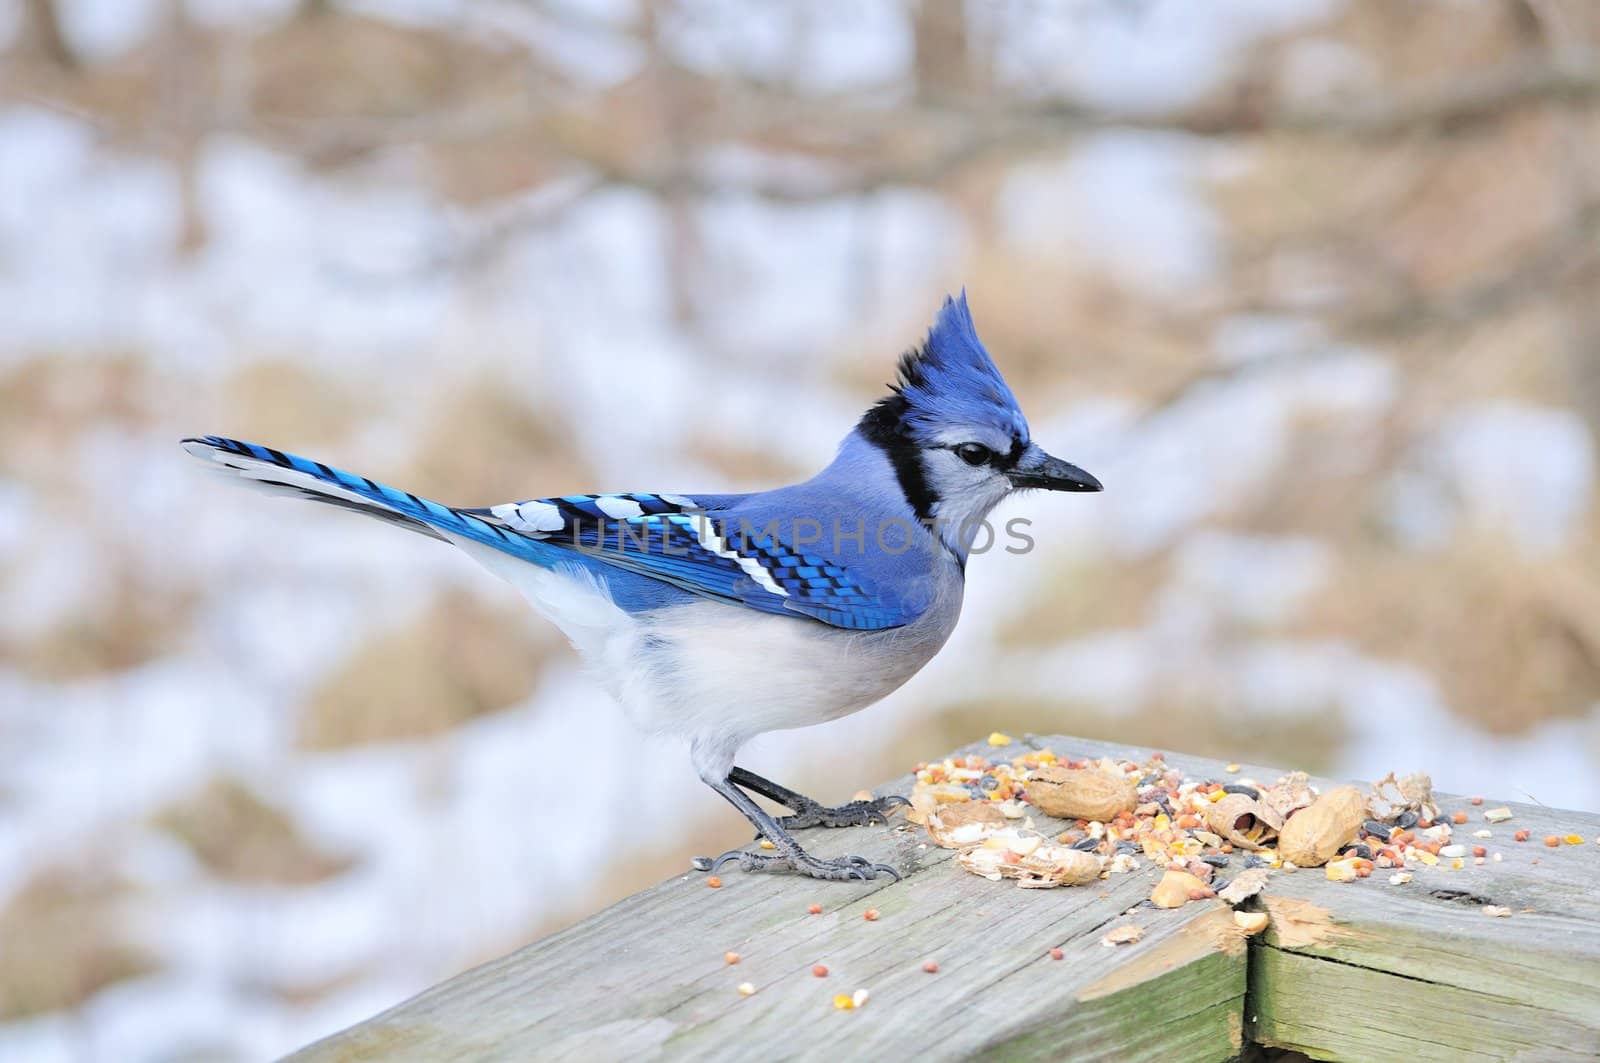 A blue jay perched on wooden rail.